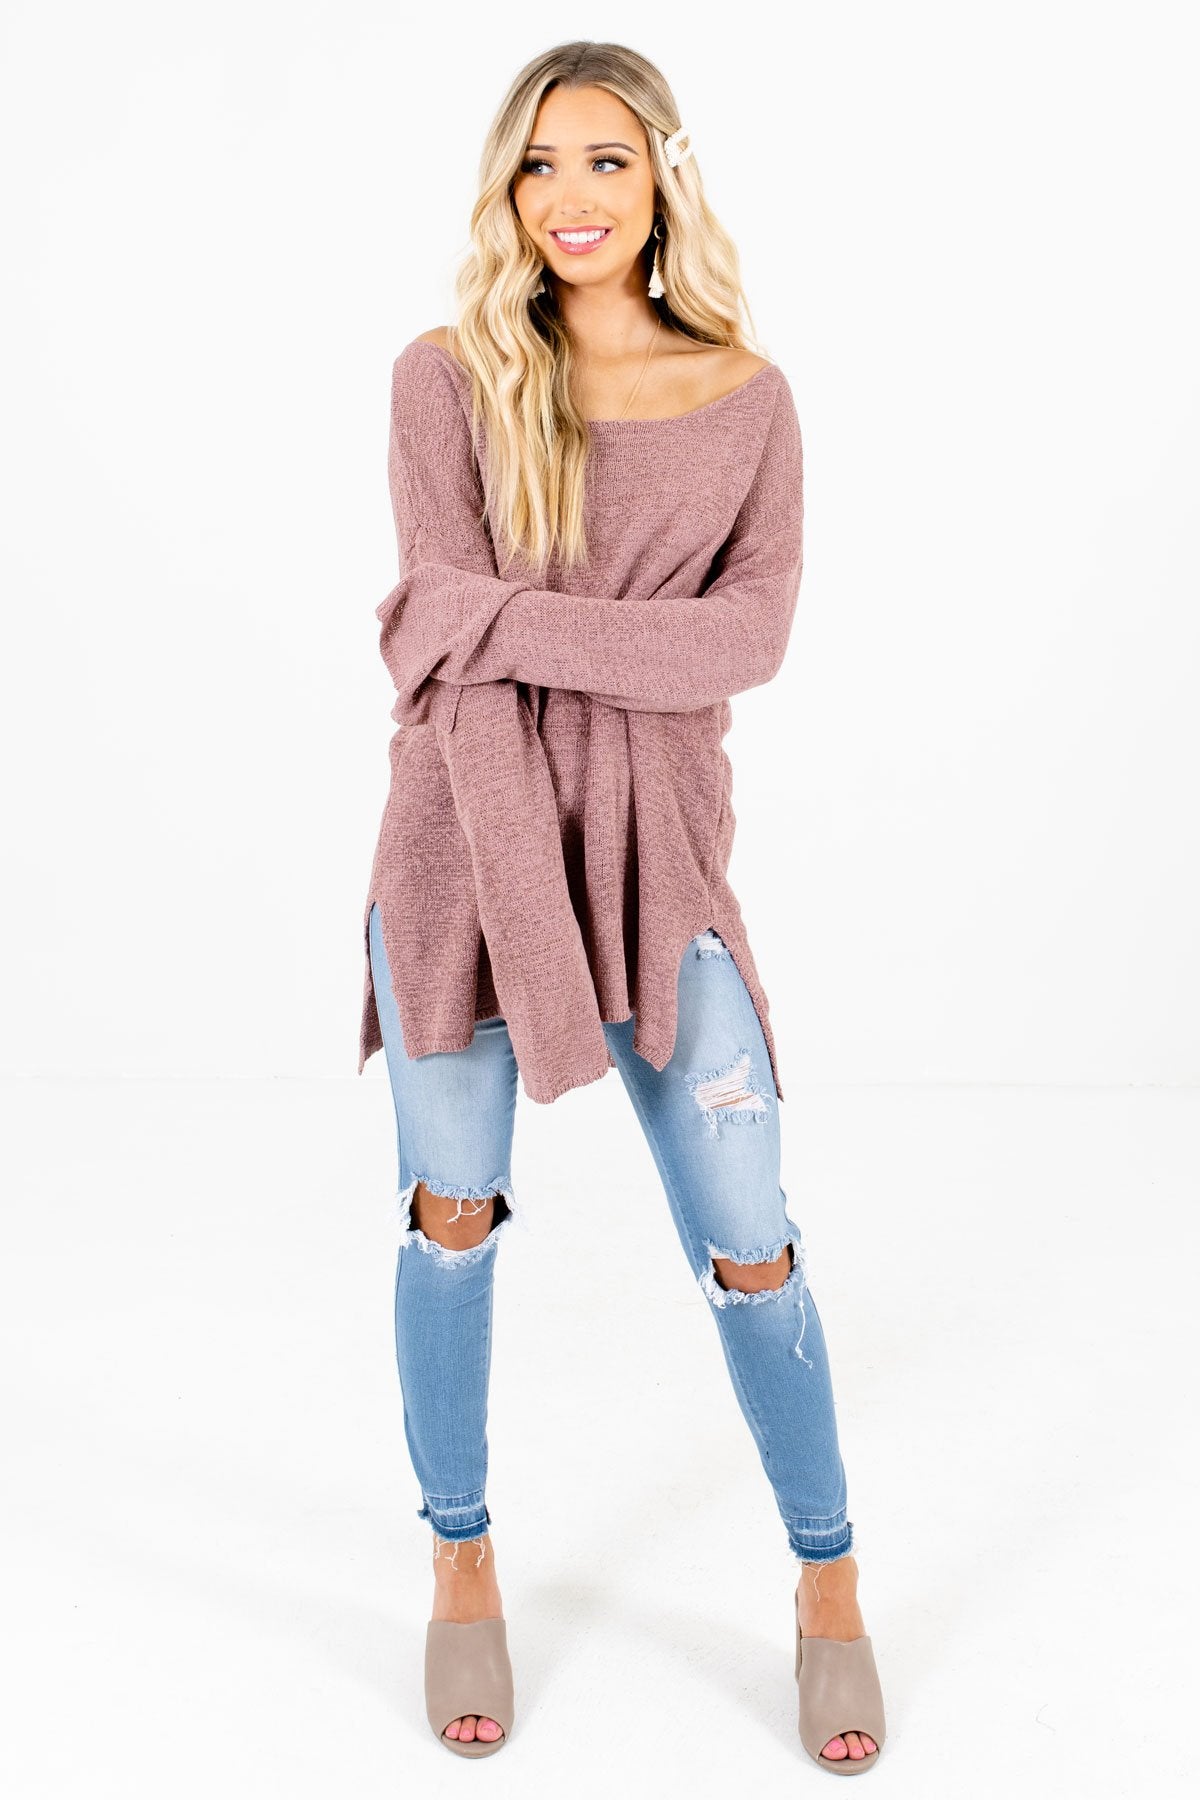 Women’s Mauve Fall and Winter Boutique Clothing